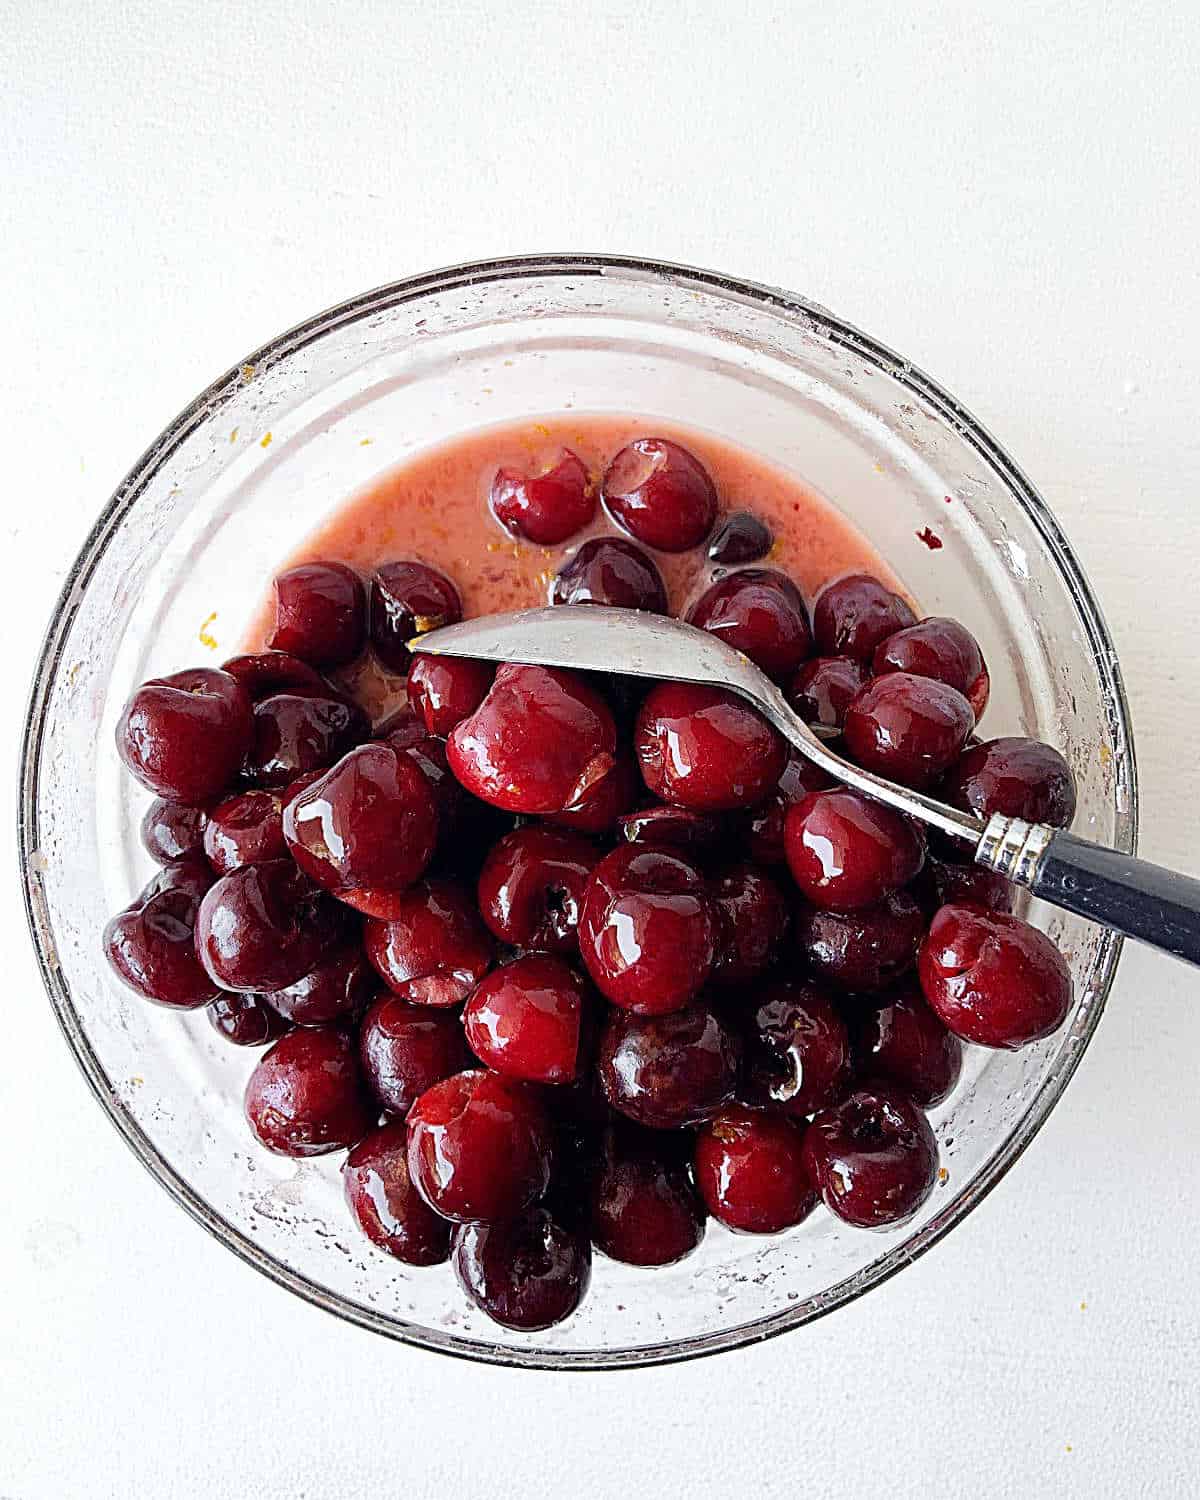 Juicy cherry filling in a glass bowl with a spoon on a white surface.